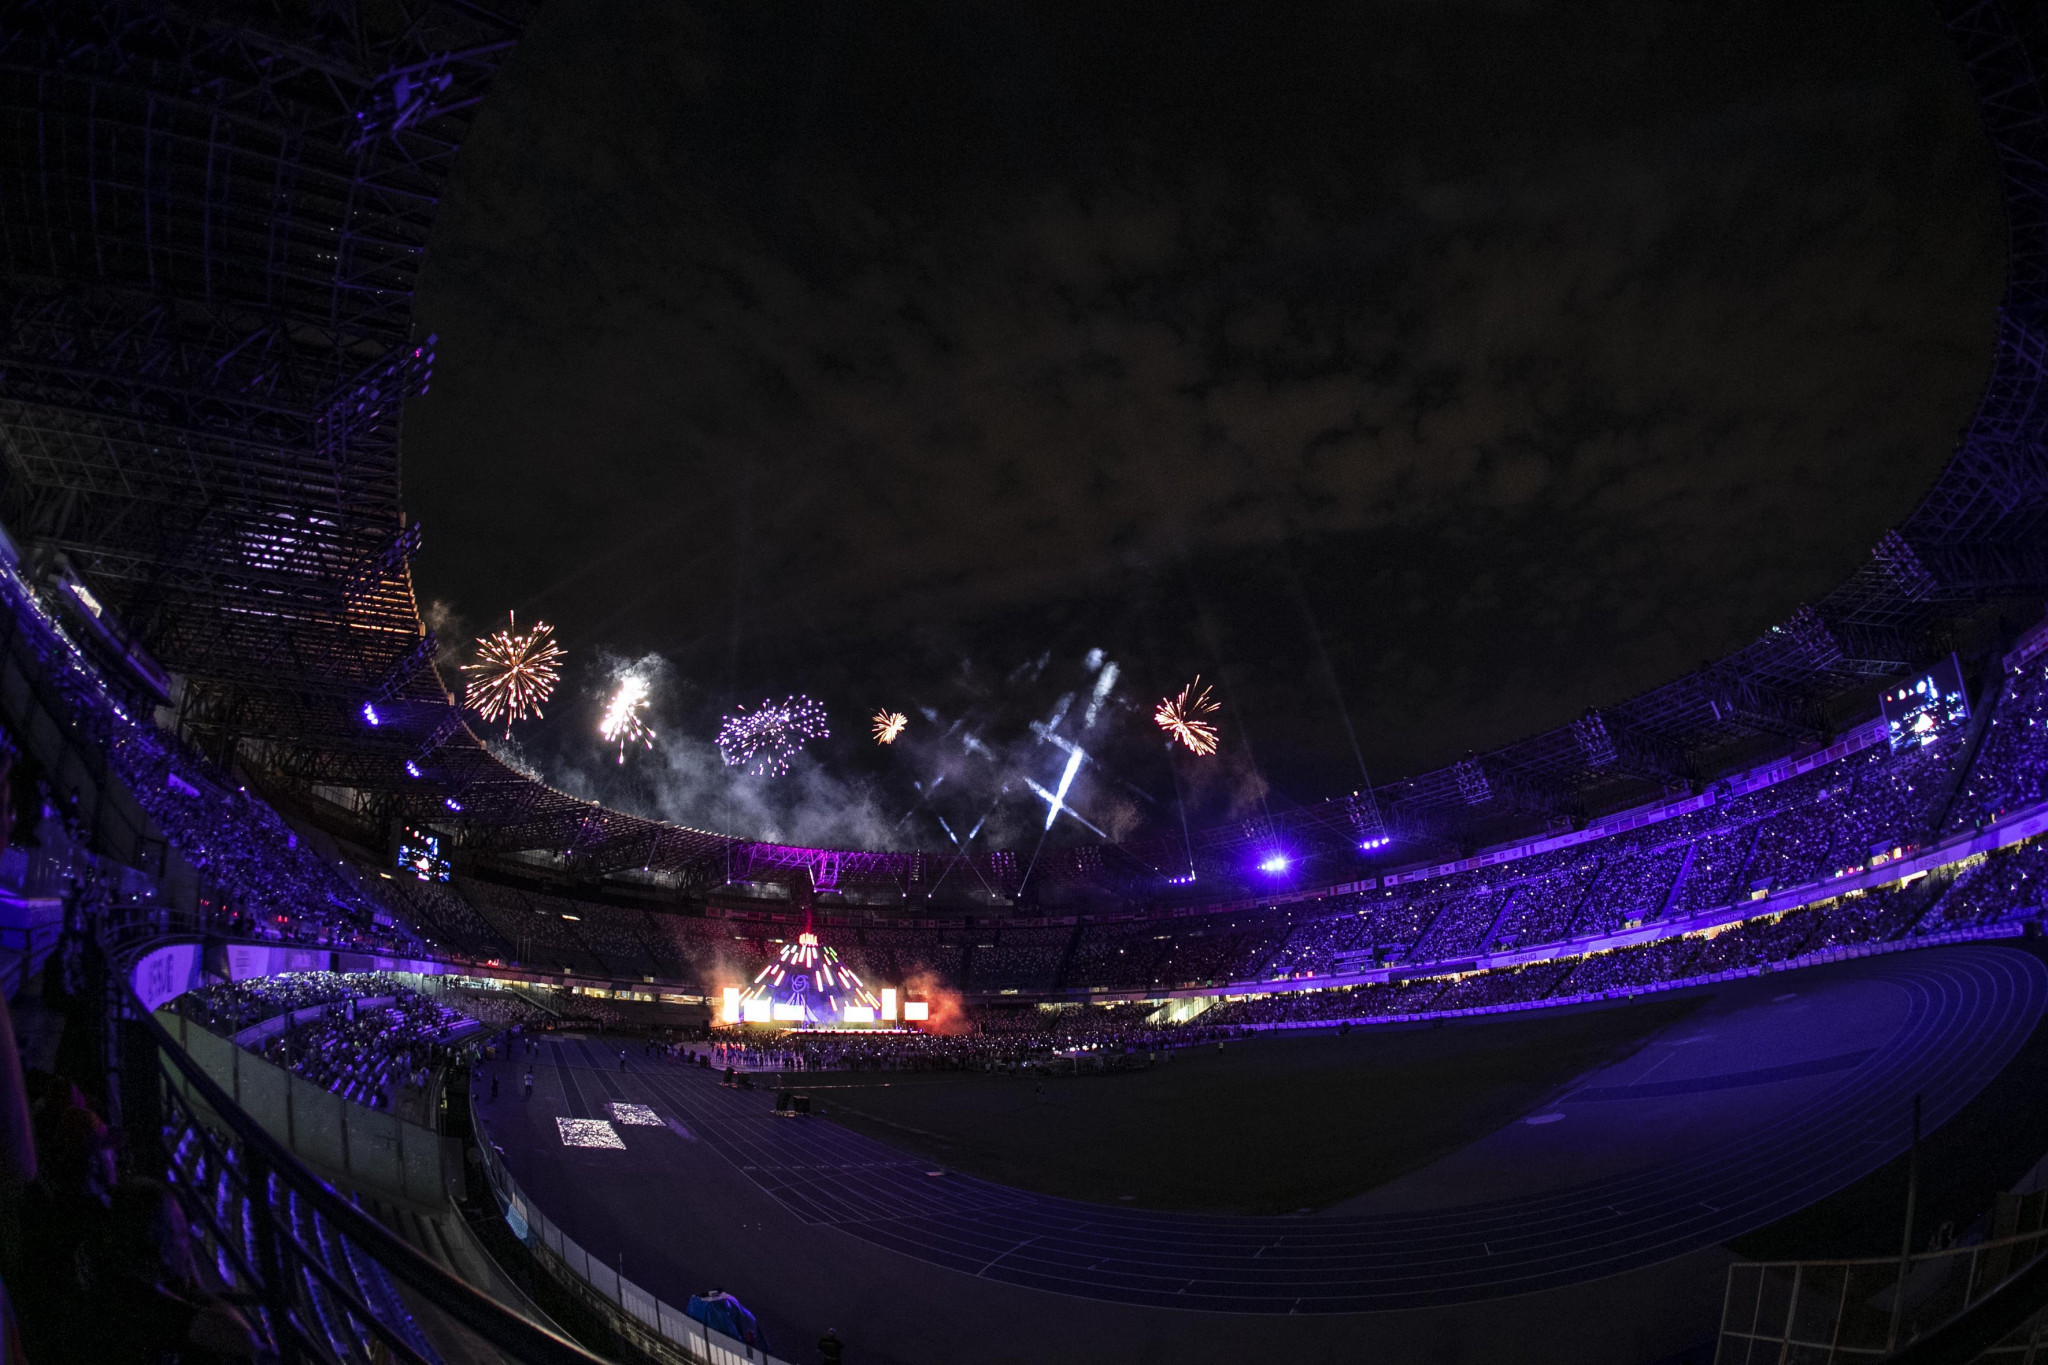 Fireworks then marked the end of the Closing Ceremony and the 2019 Summer Universiade ©Naples 2019